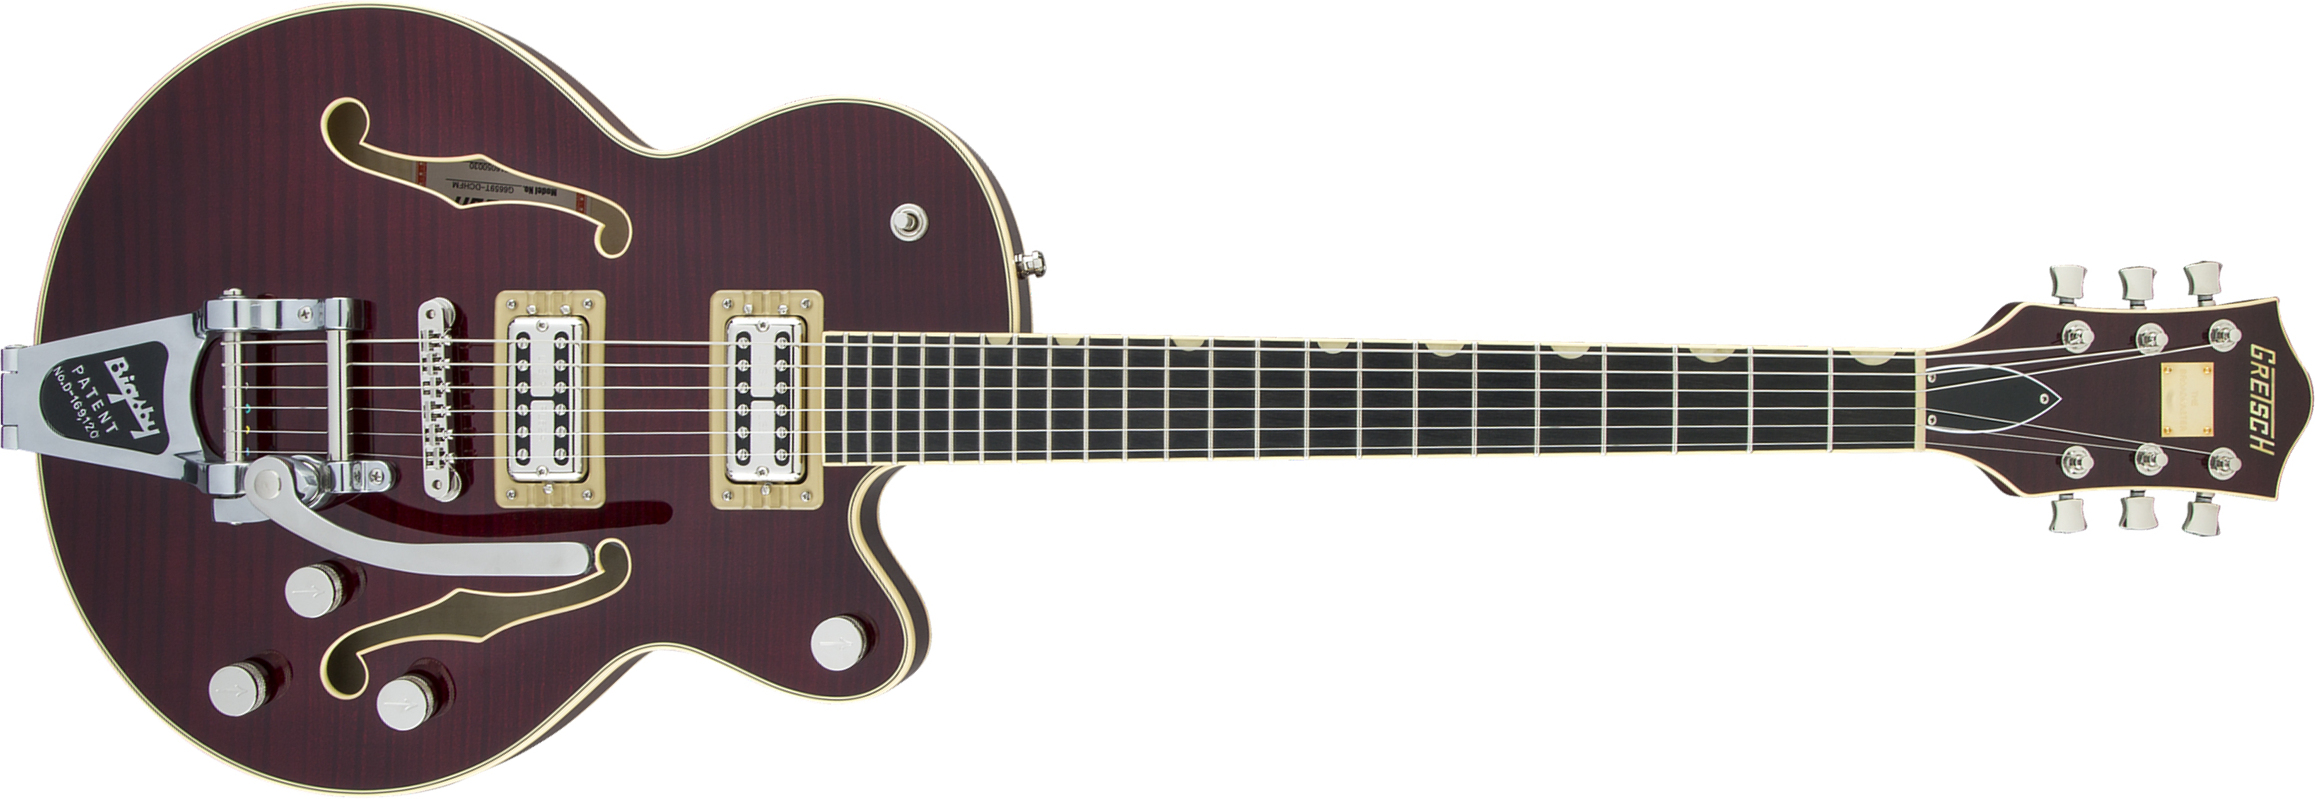 Gretsch G6659tfm Broadkaster Jr Center Bloc Players Edition Pro Jap Bigsby Eb - Dark Cherry Stain - Semi-hollow electric guitar - Main picture